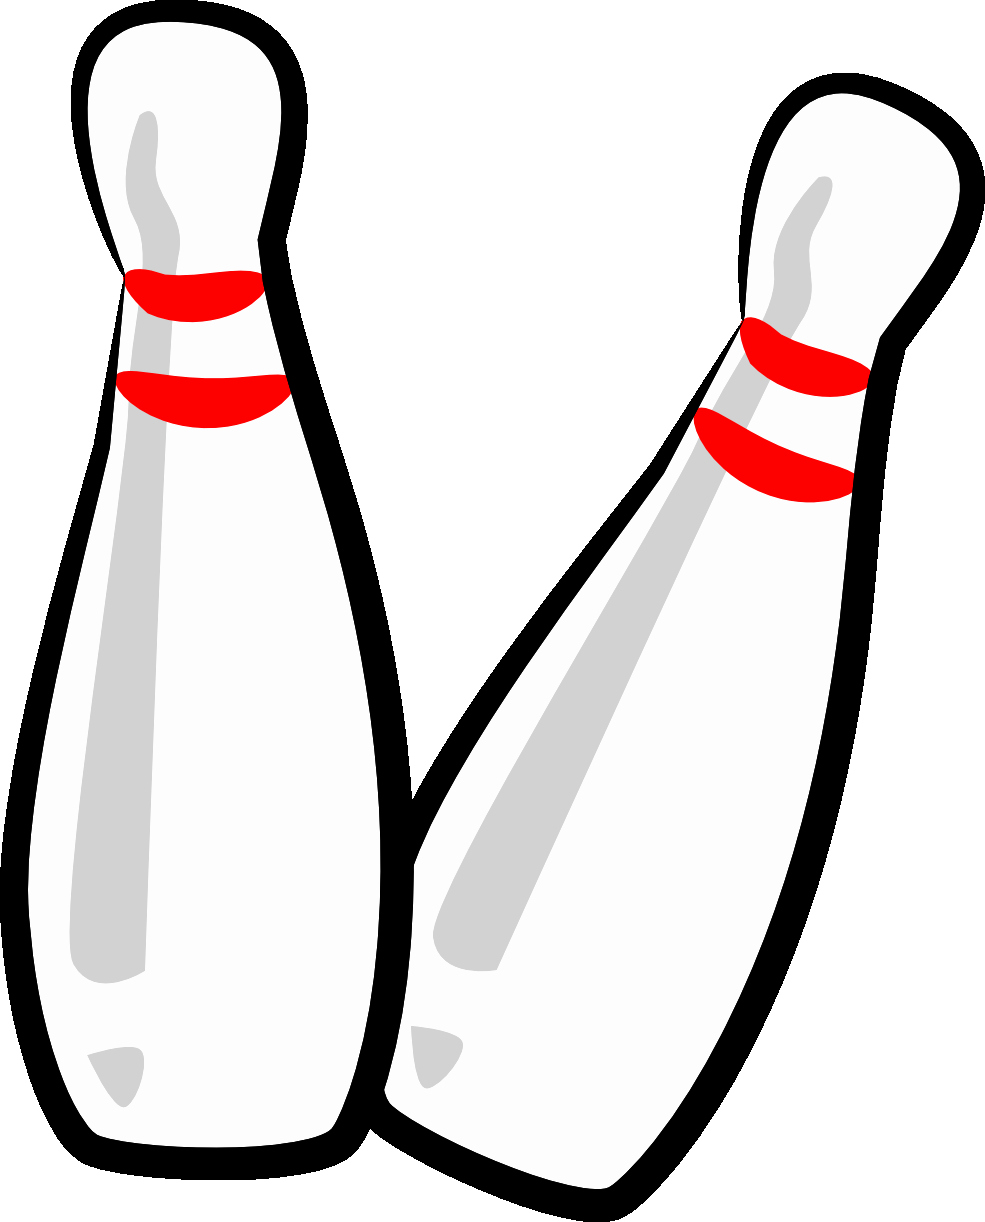 Completely Free Clip Art Best Of the totally Free Clip Art Blog Sports Bowling Pins